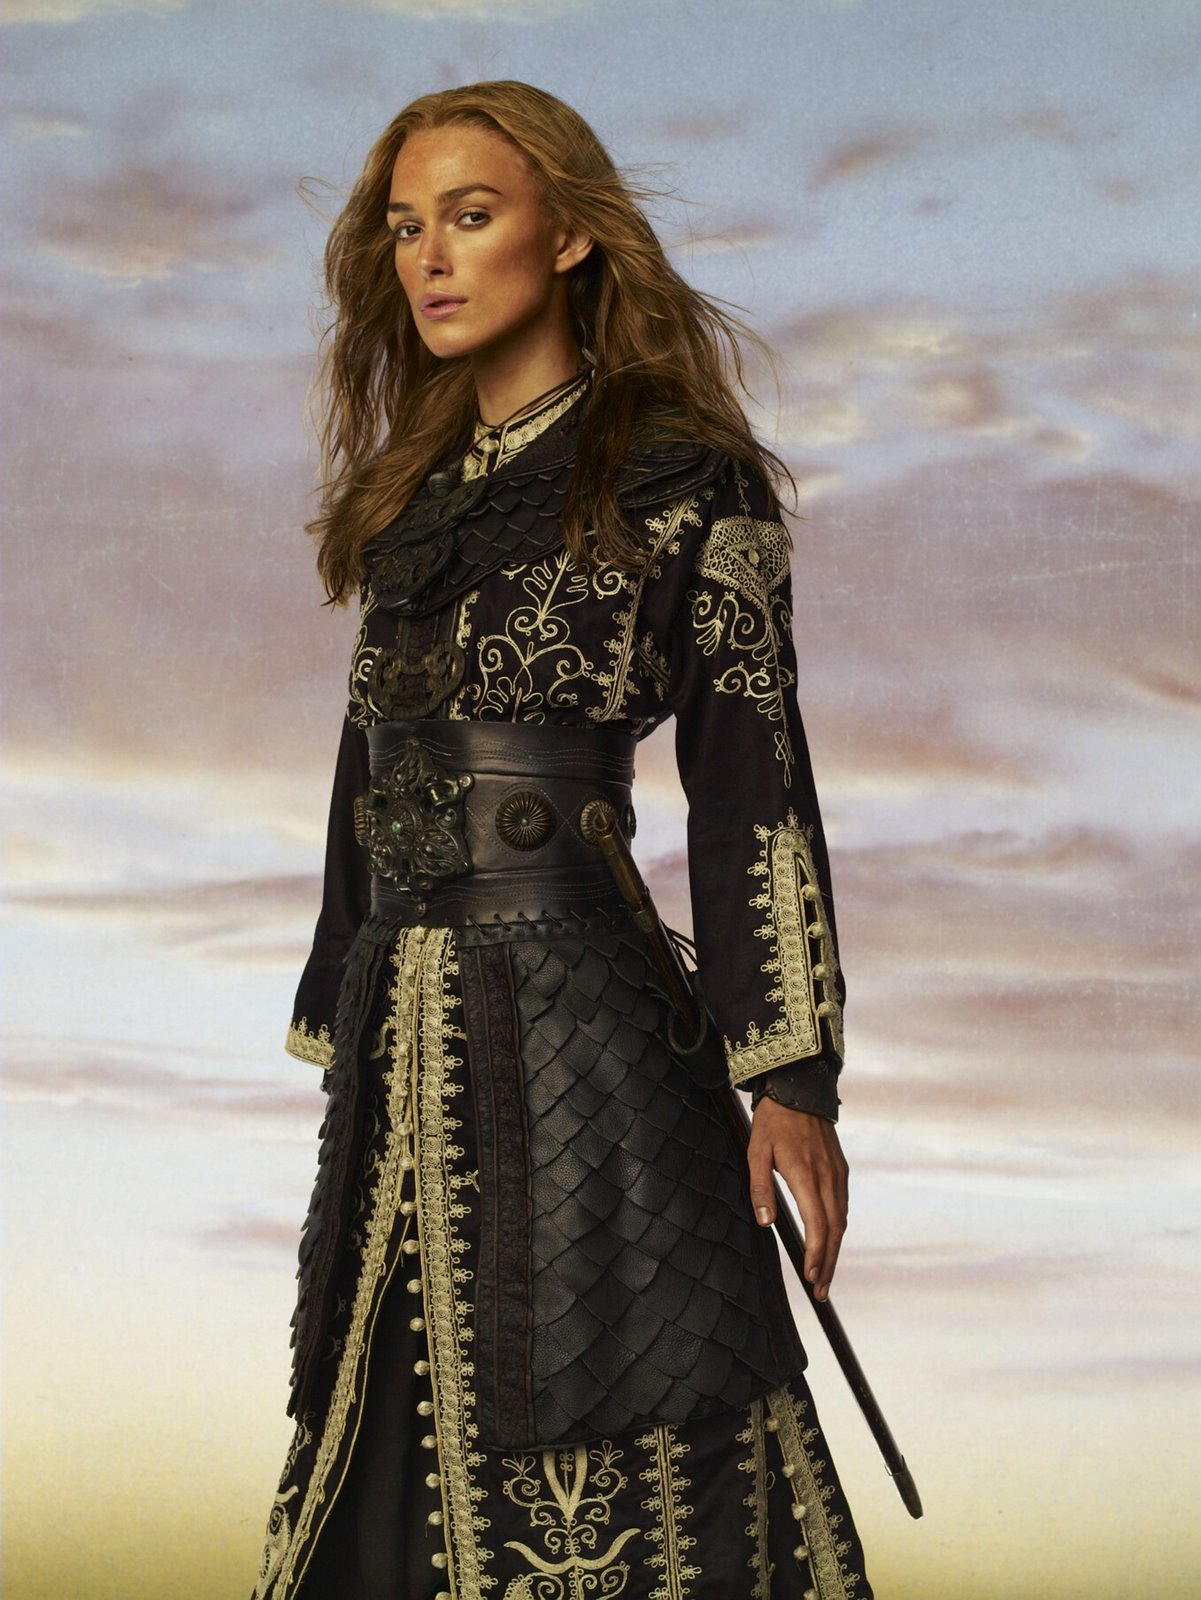 Keira Knightley Pirates Of The Caribbean Costume